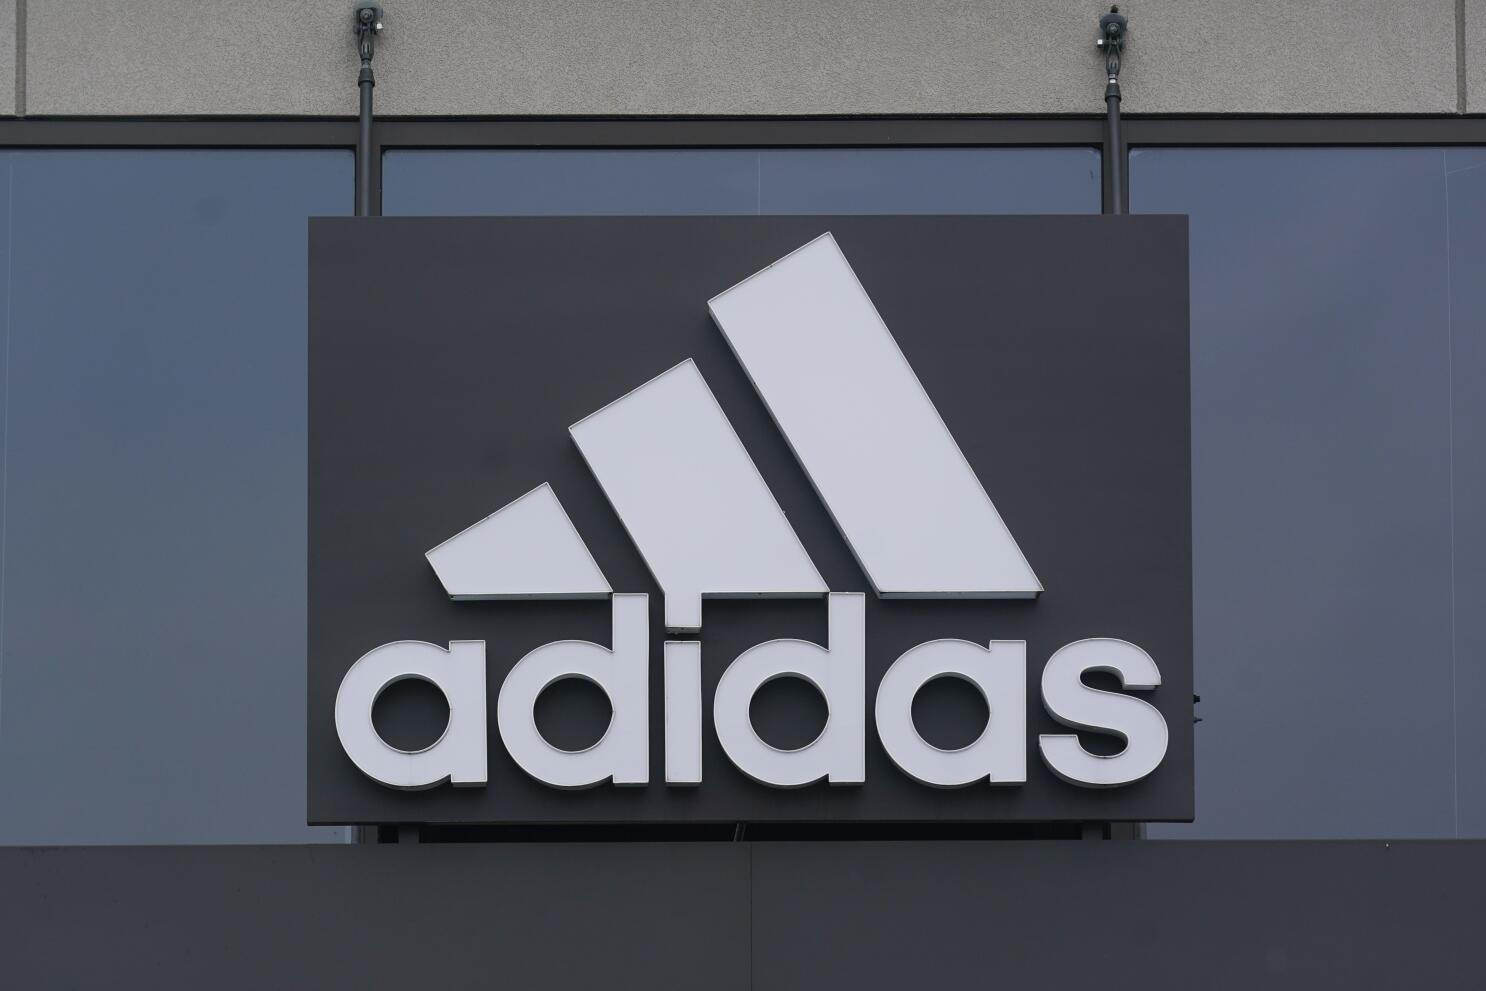 film tortur Kom op Adidas to sell Yeezy shoes and donate proceeds months after Kanye West split  - The San Diego Union-Tribune